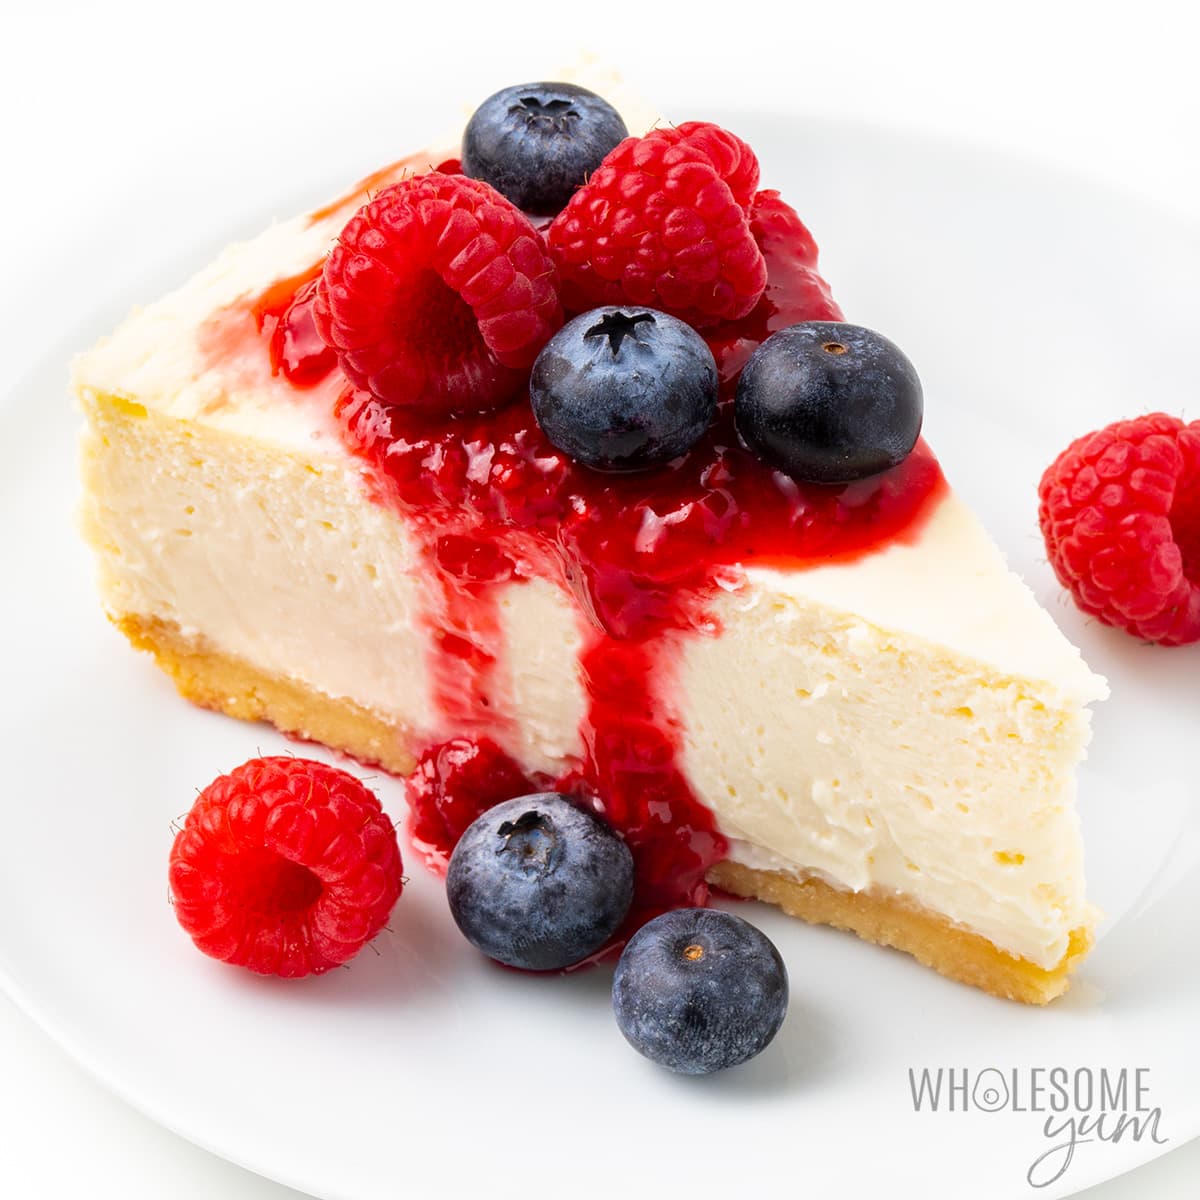 Keto Cheesecake Recipe (Low Carb Sugar-Free Cheesecake) - Wholesome Yum - Easy healthy recipes. 10 ingredients or less.